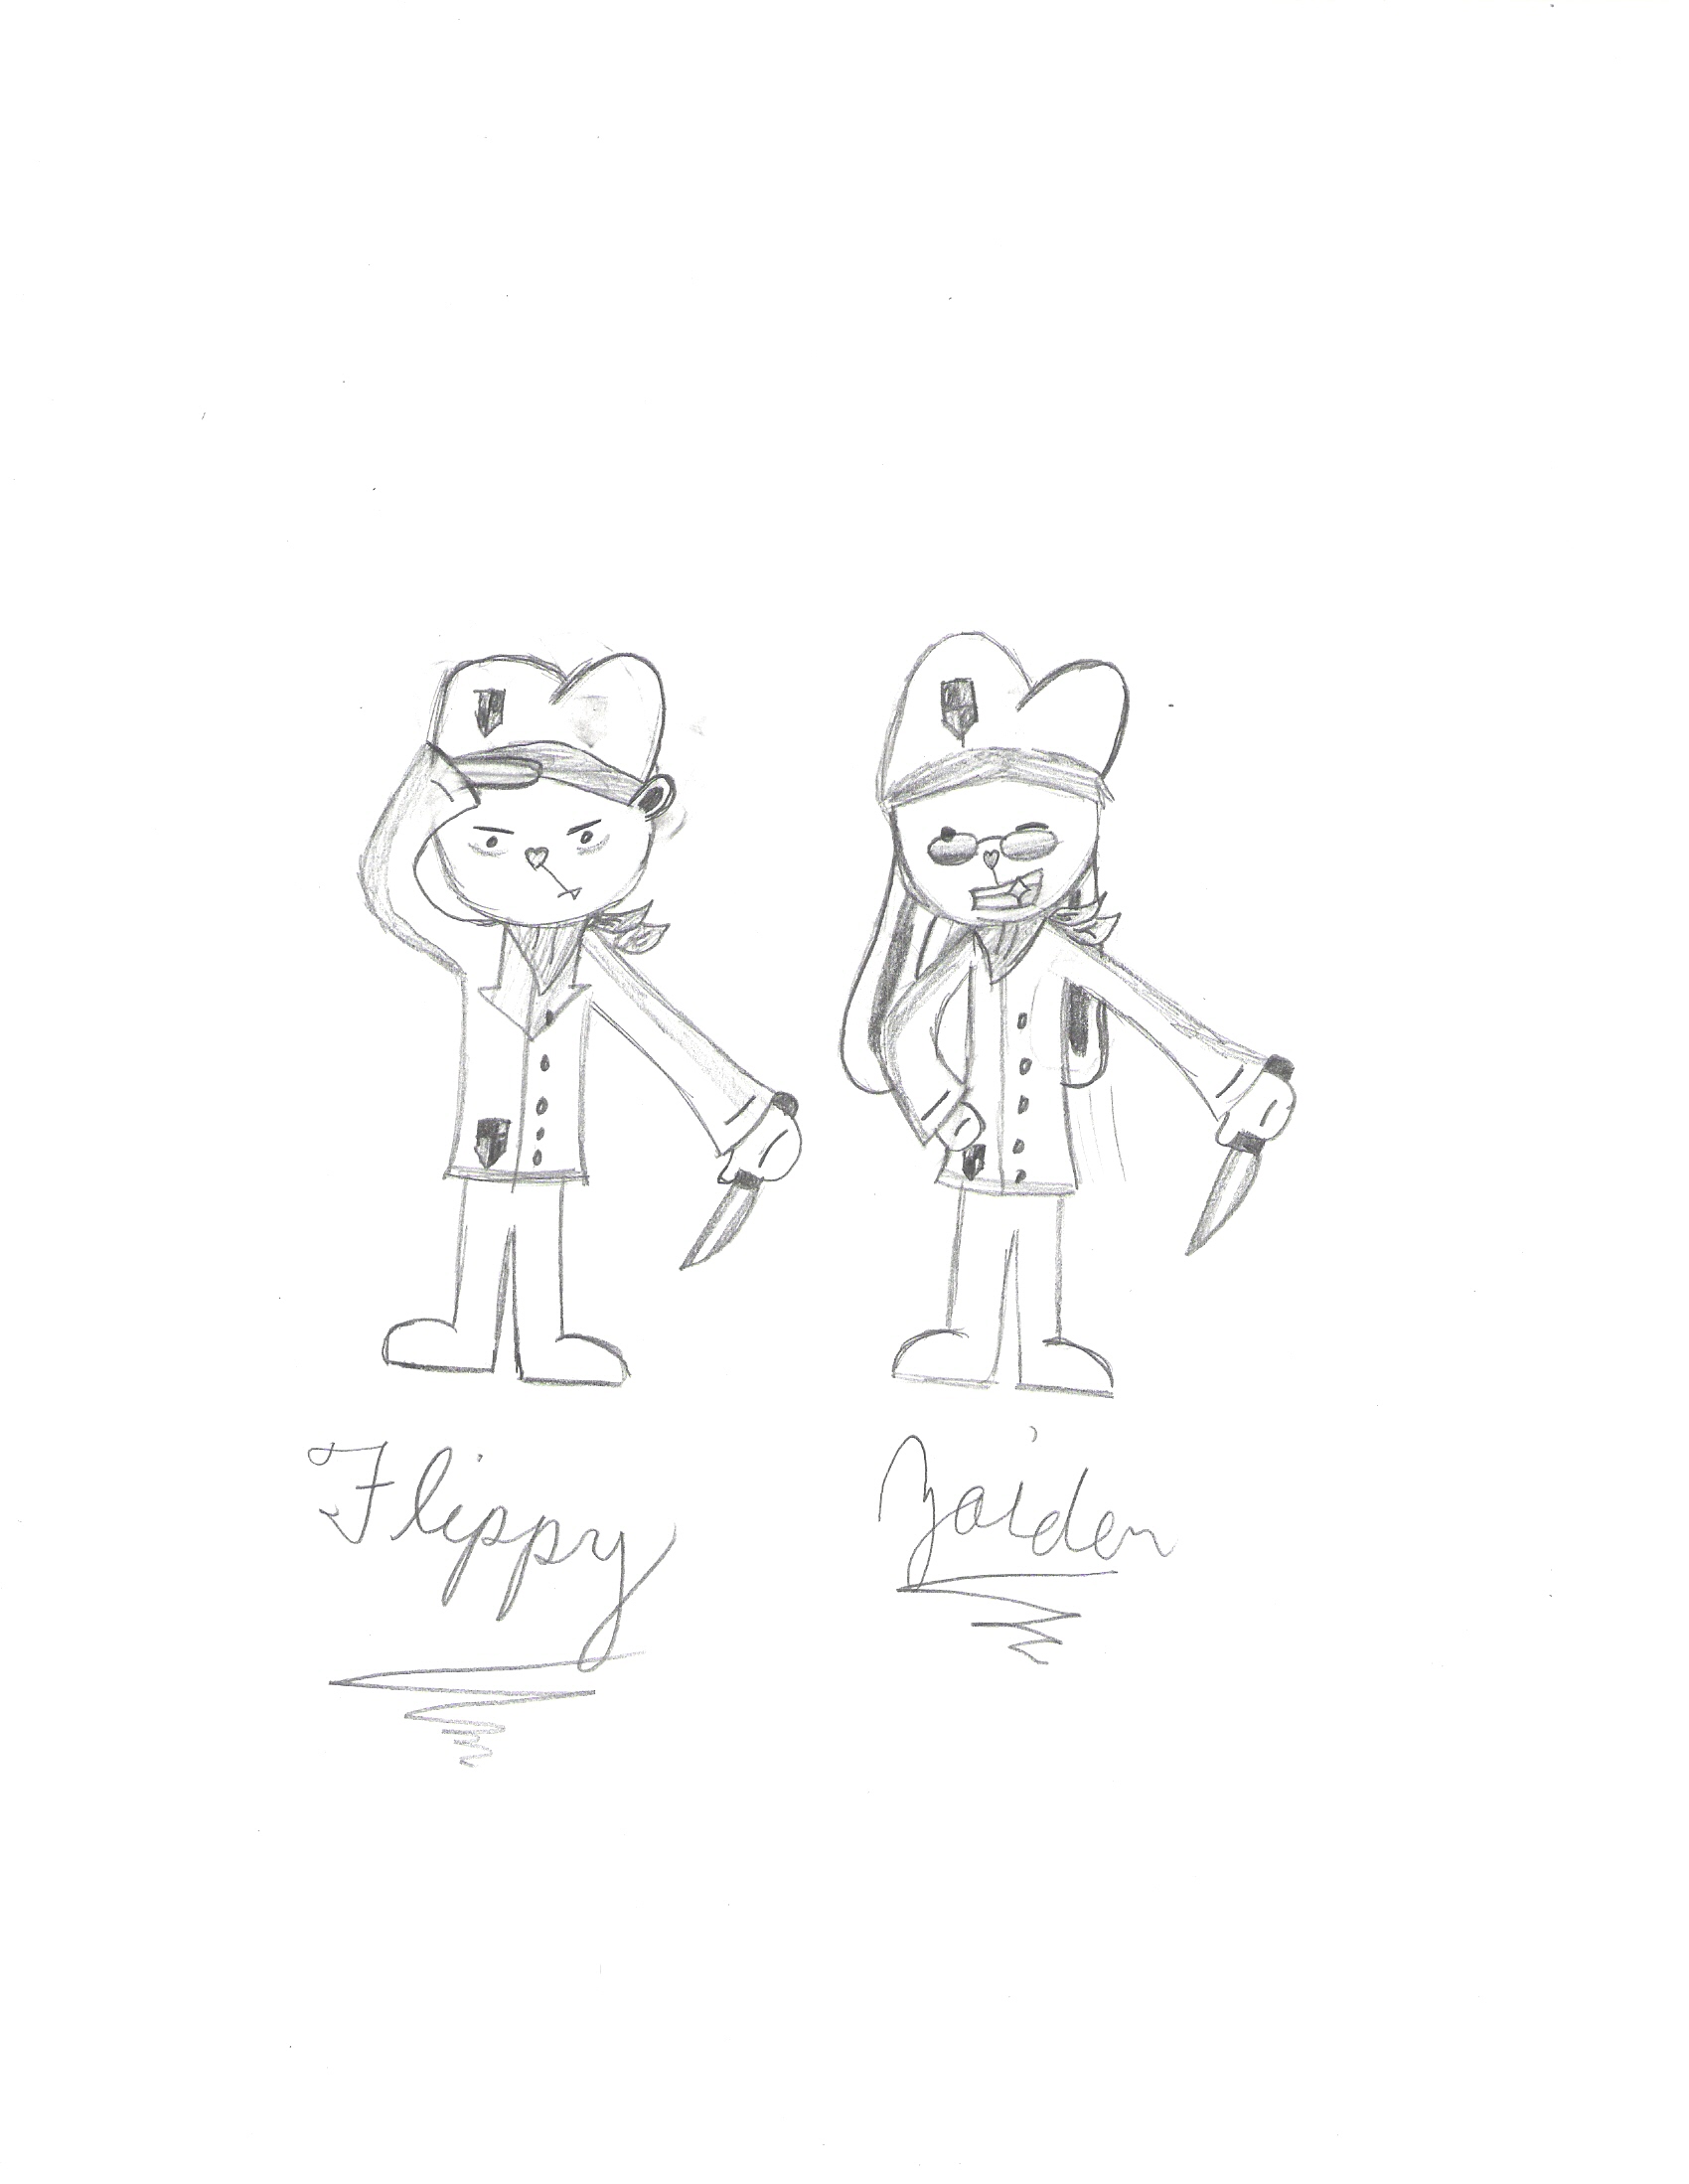 Flippy and Zaiden (KOOLGAMES style) by Lurking_Shadow_Creature